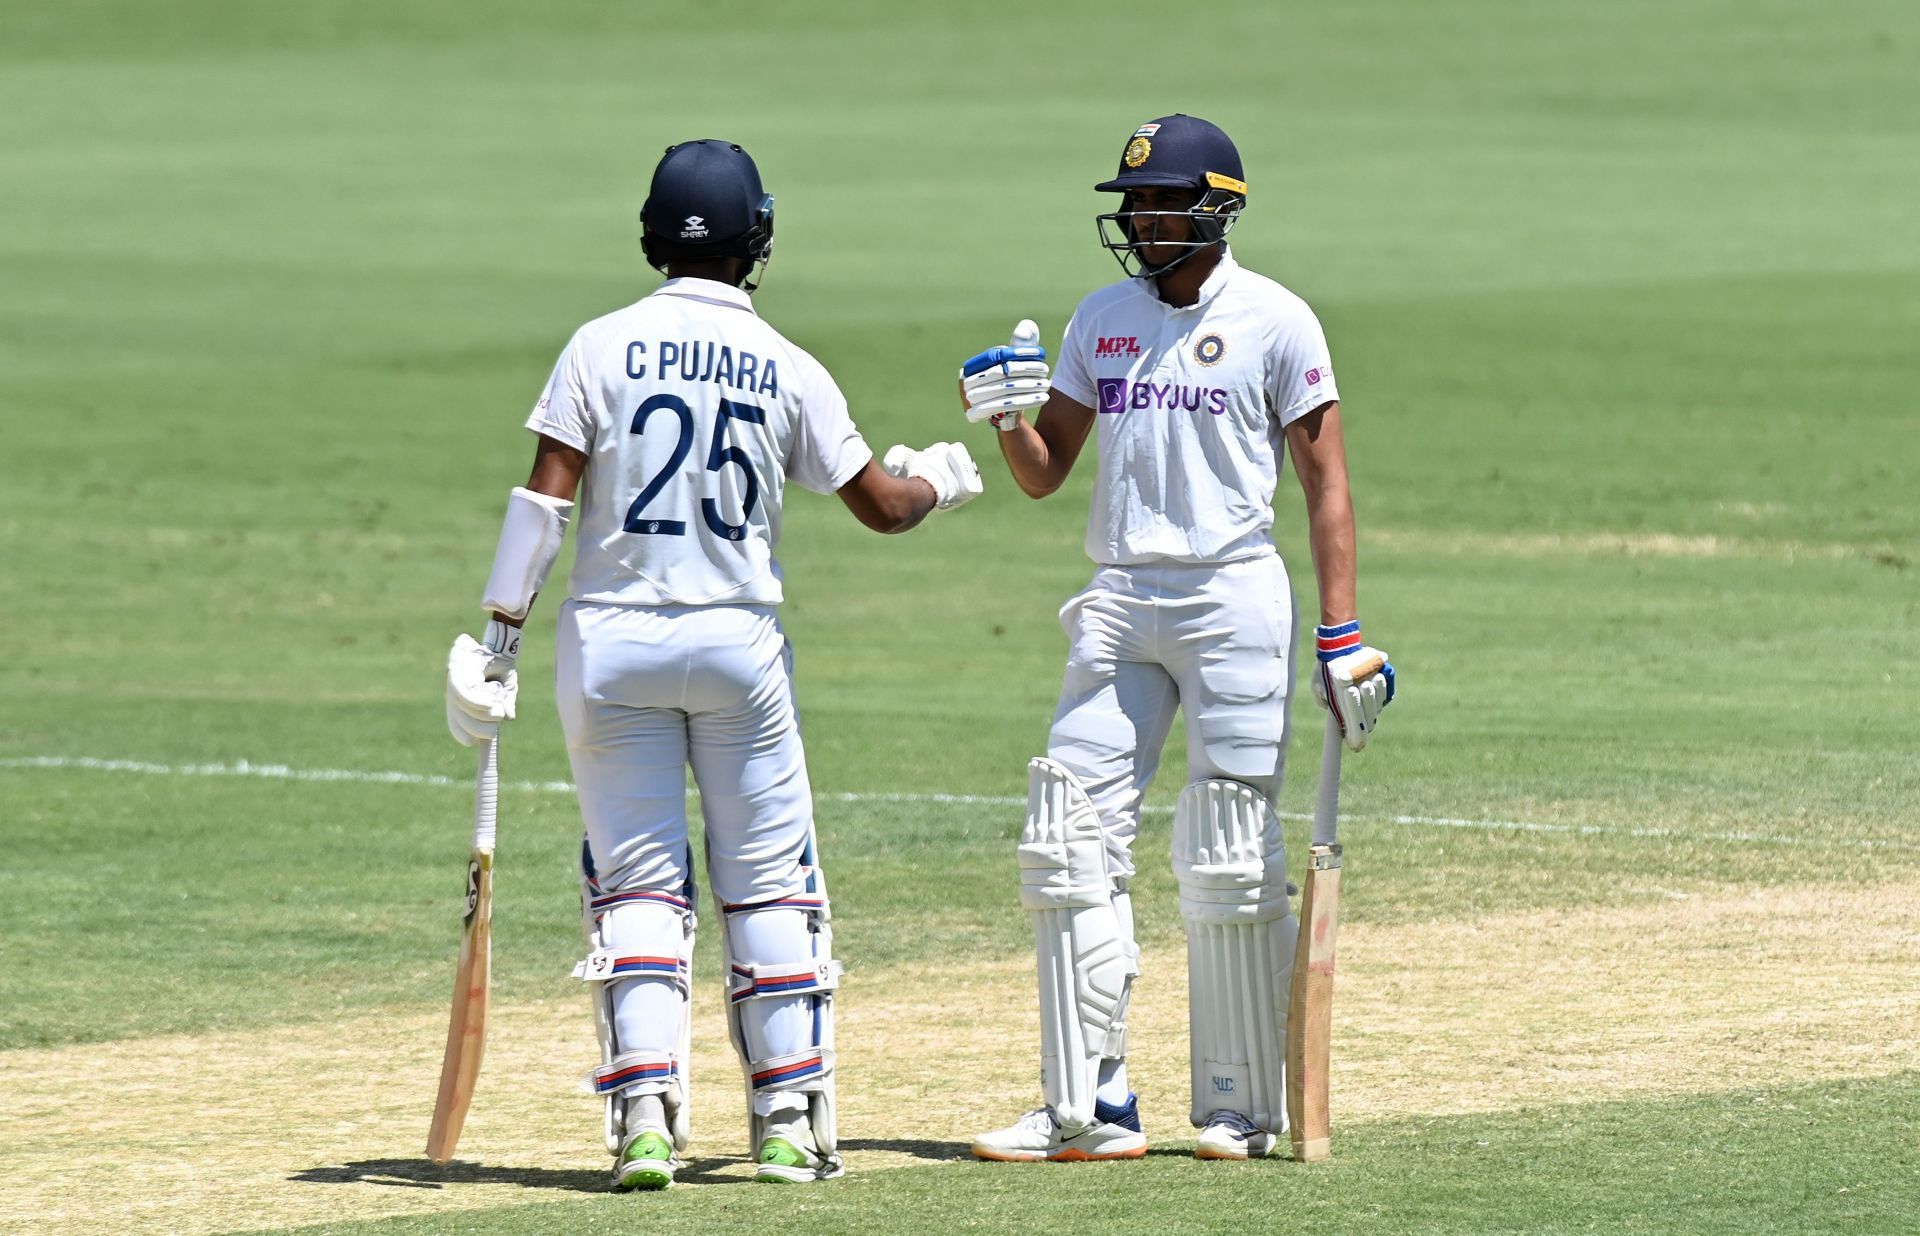 Shubman Gill (R) could very well join Cheteshwar Pujara at the 100-Test club over time.